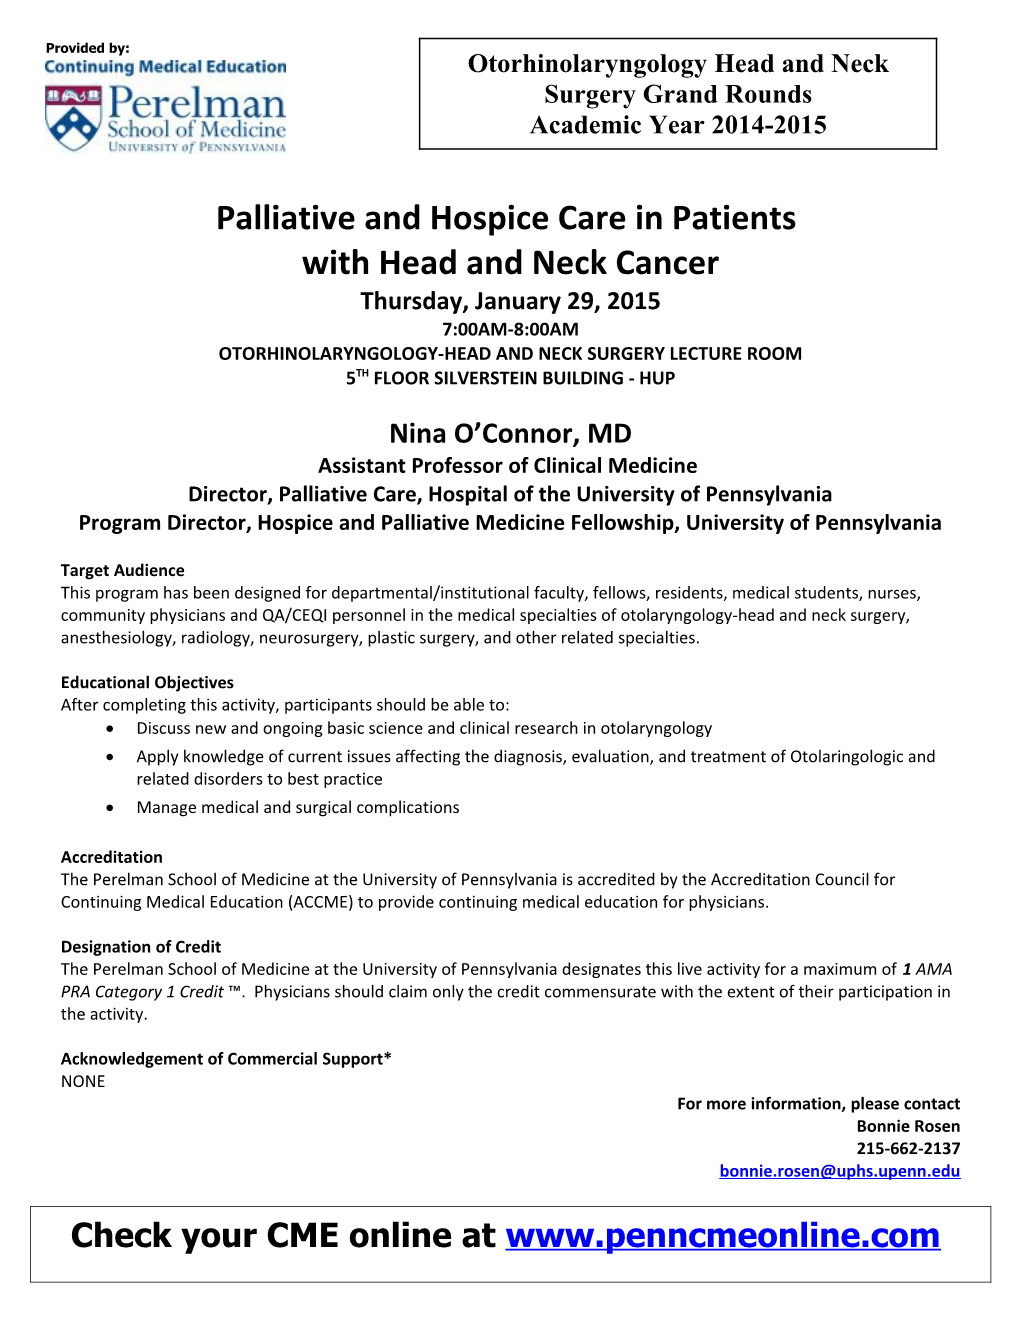 Palliative and Hospice Care in Patients